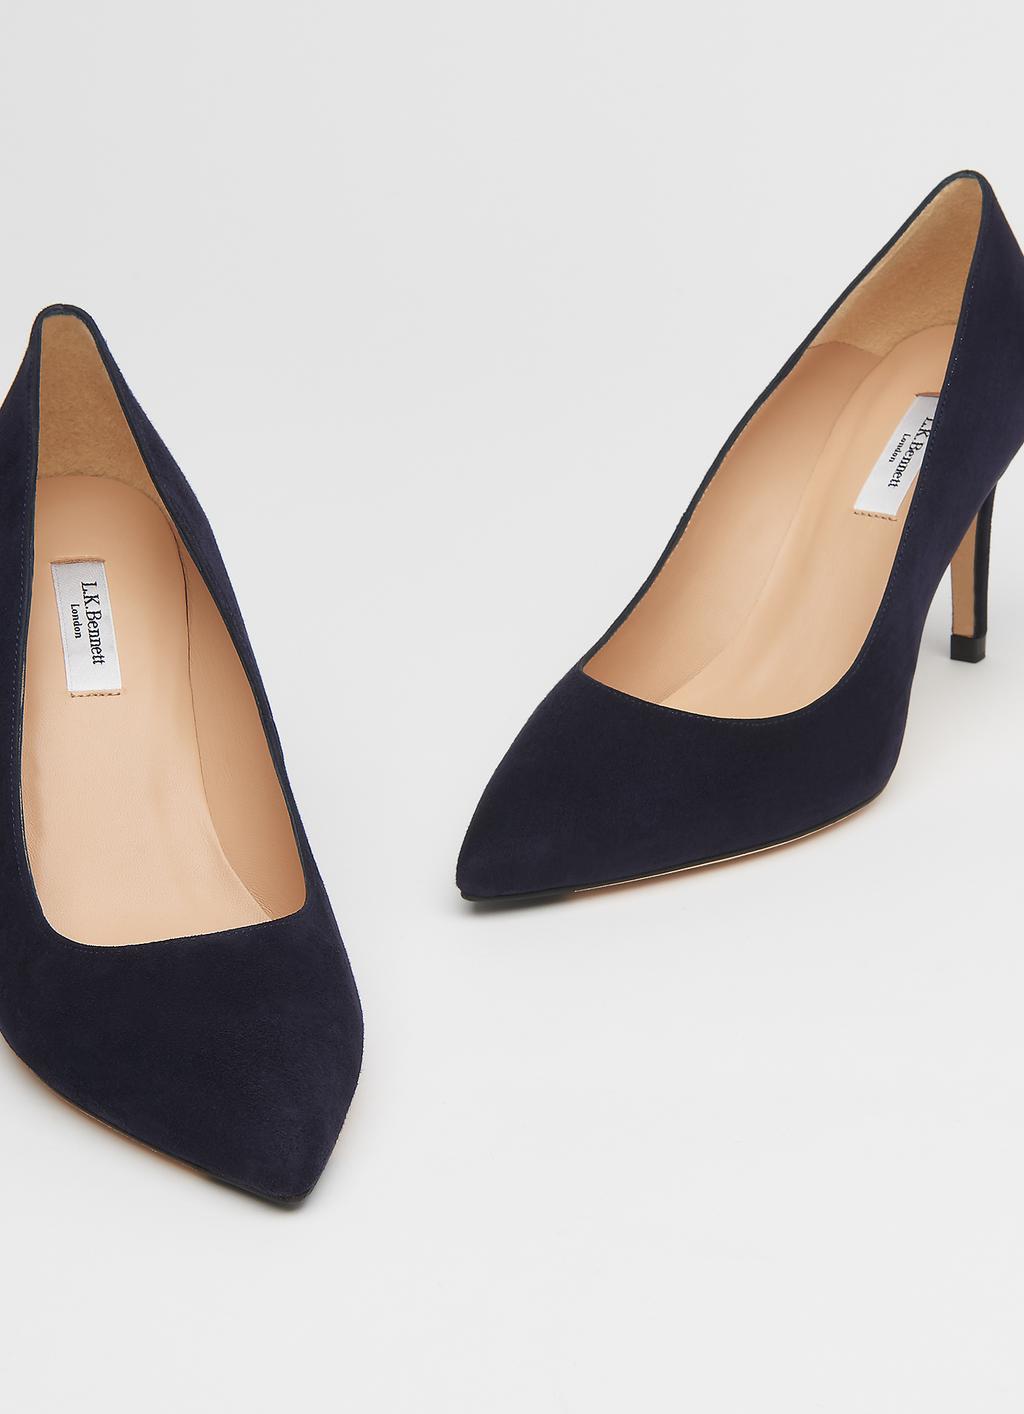 Floret Navy Suede Pointed Toe Courts | Shoes | L.K.Bennett